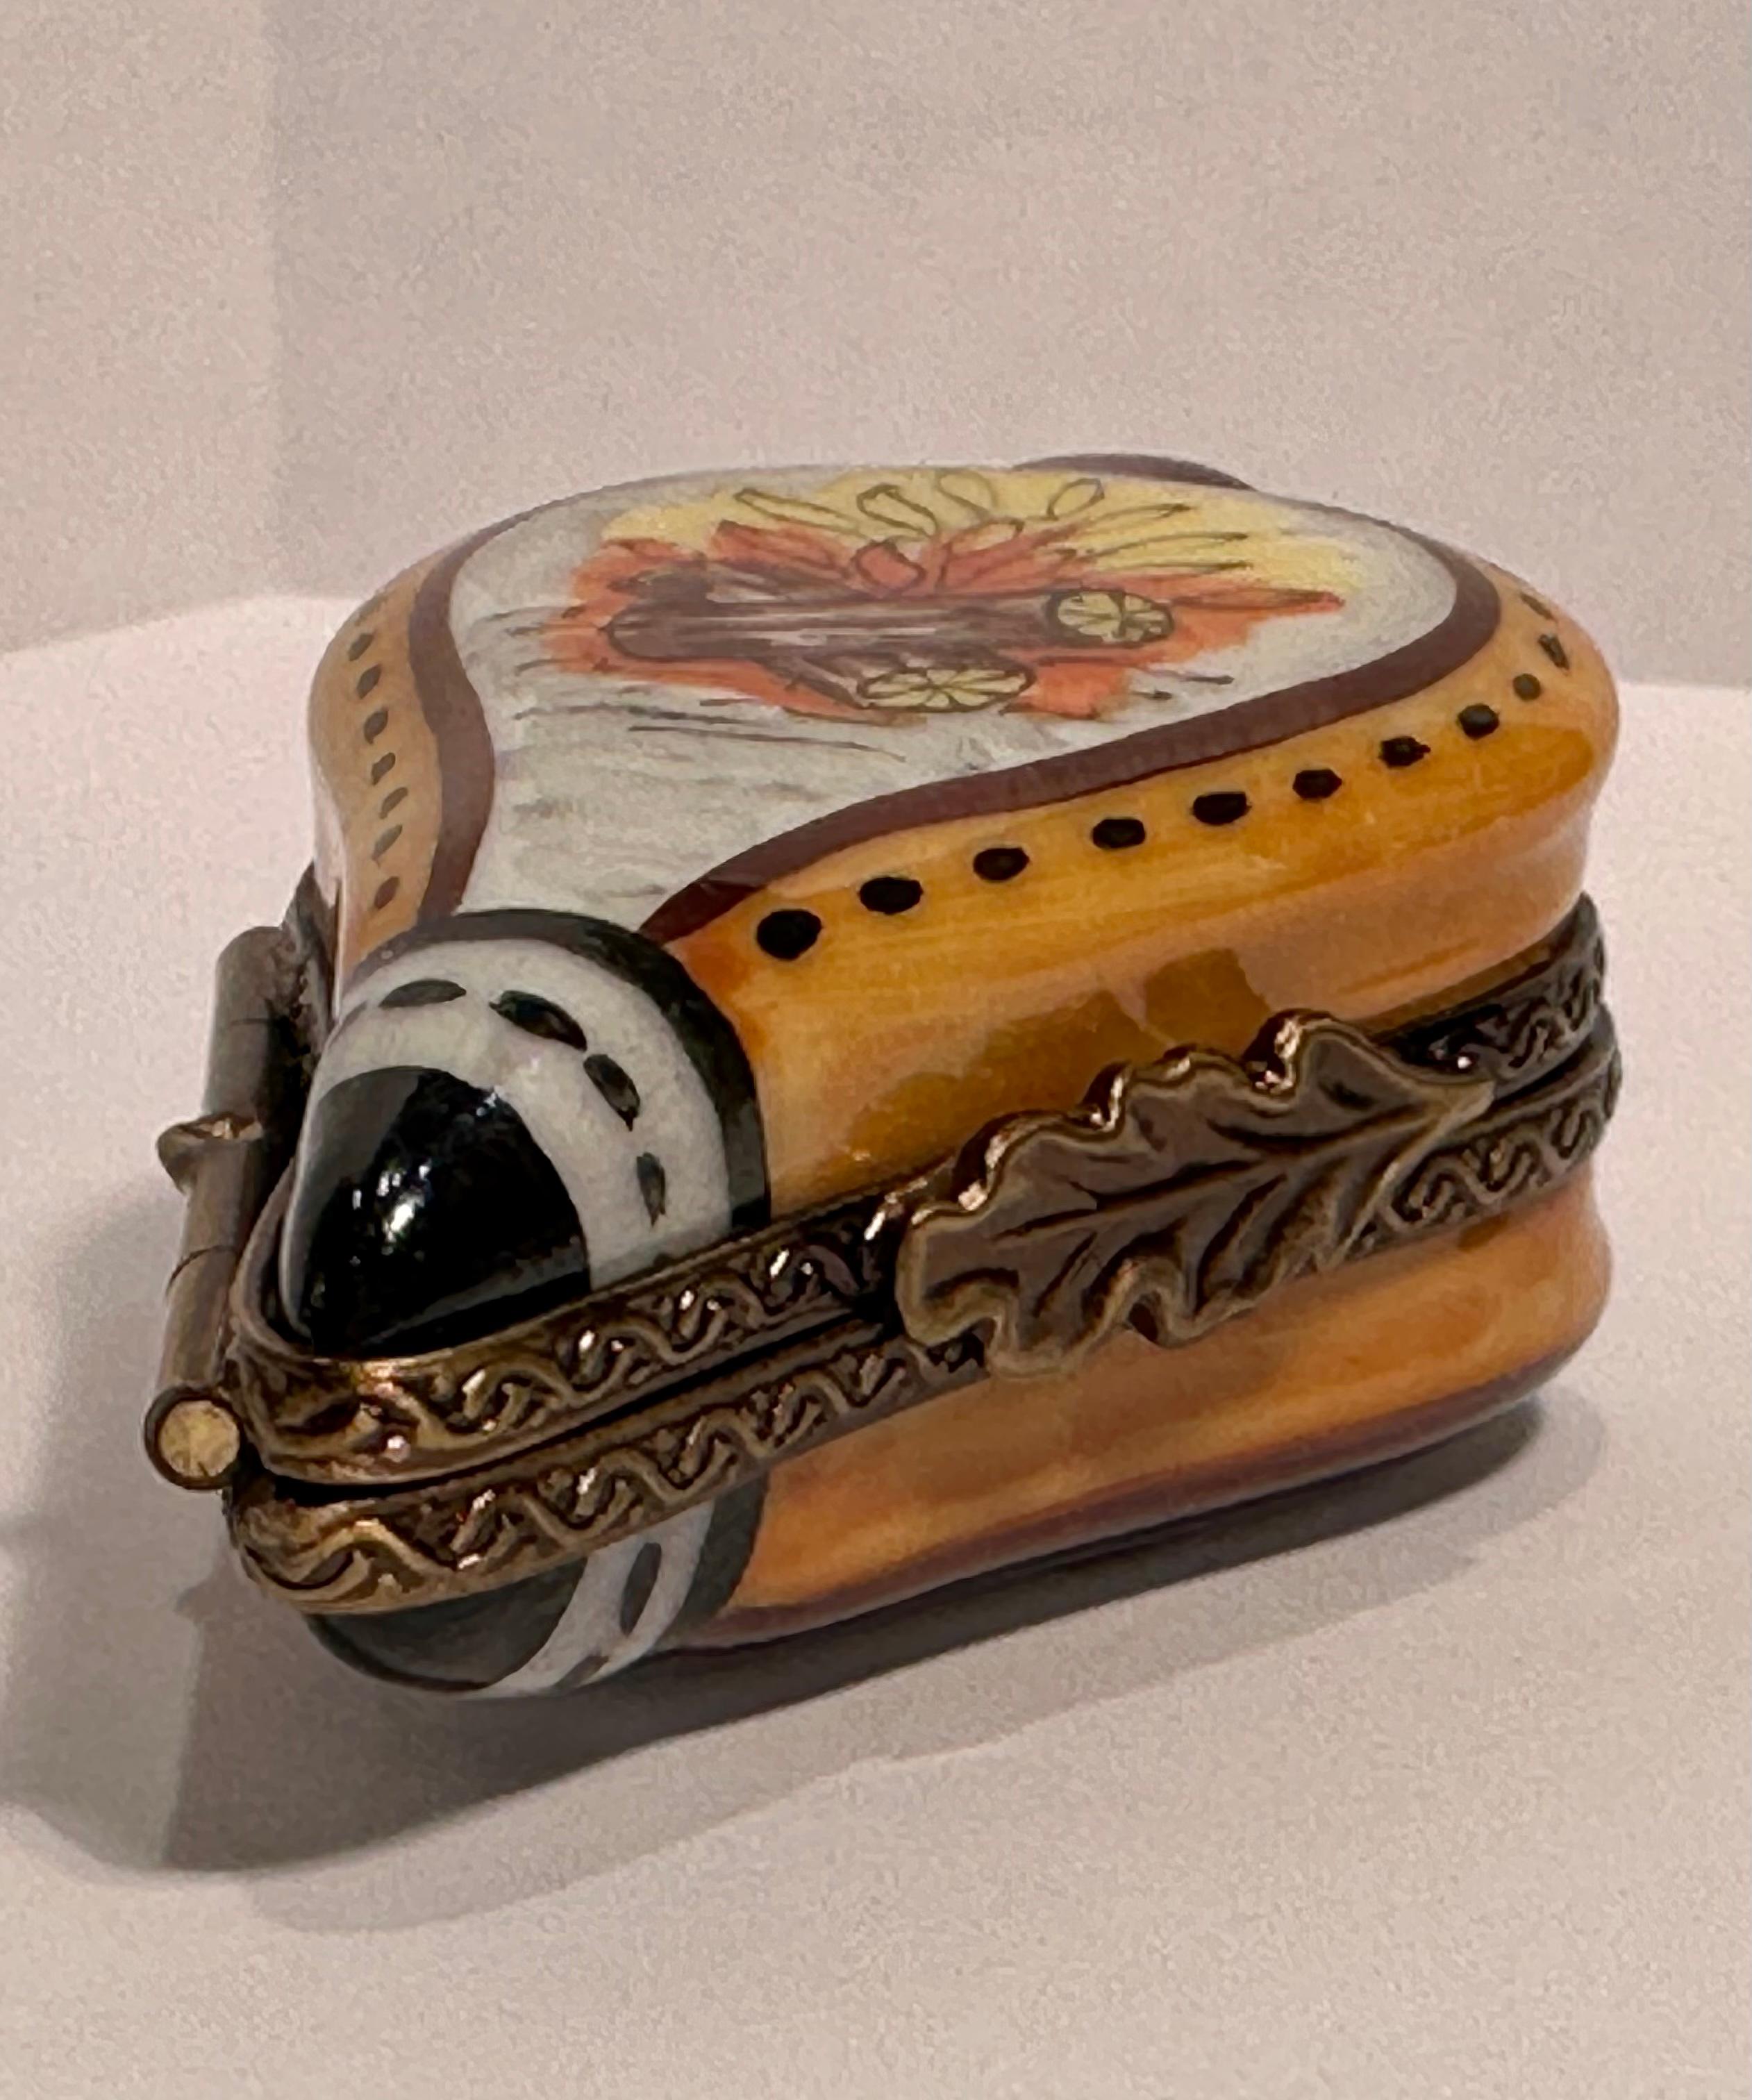 Collectible and very unique, Limoges porcelain miniature trinket box is handmade and hand painted in France and features a very detailed bellows with a hand-painted burning logs scene on one side and a hook and arrow scene on the reverse side. The